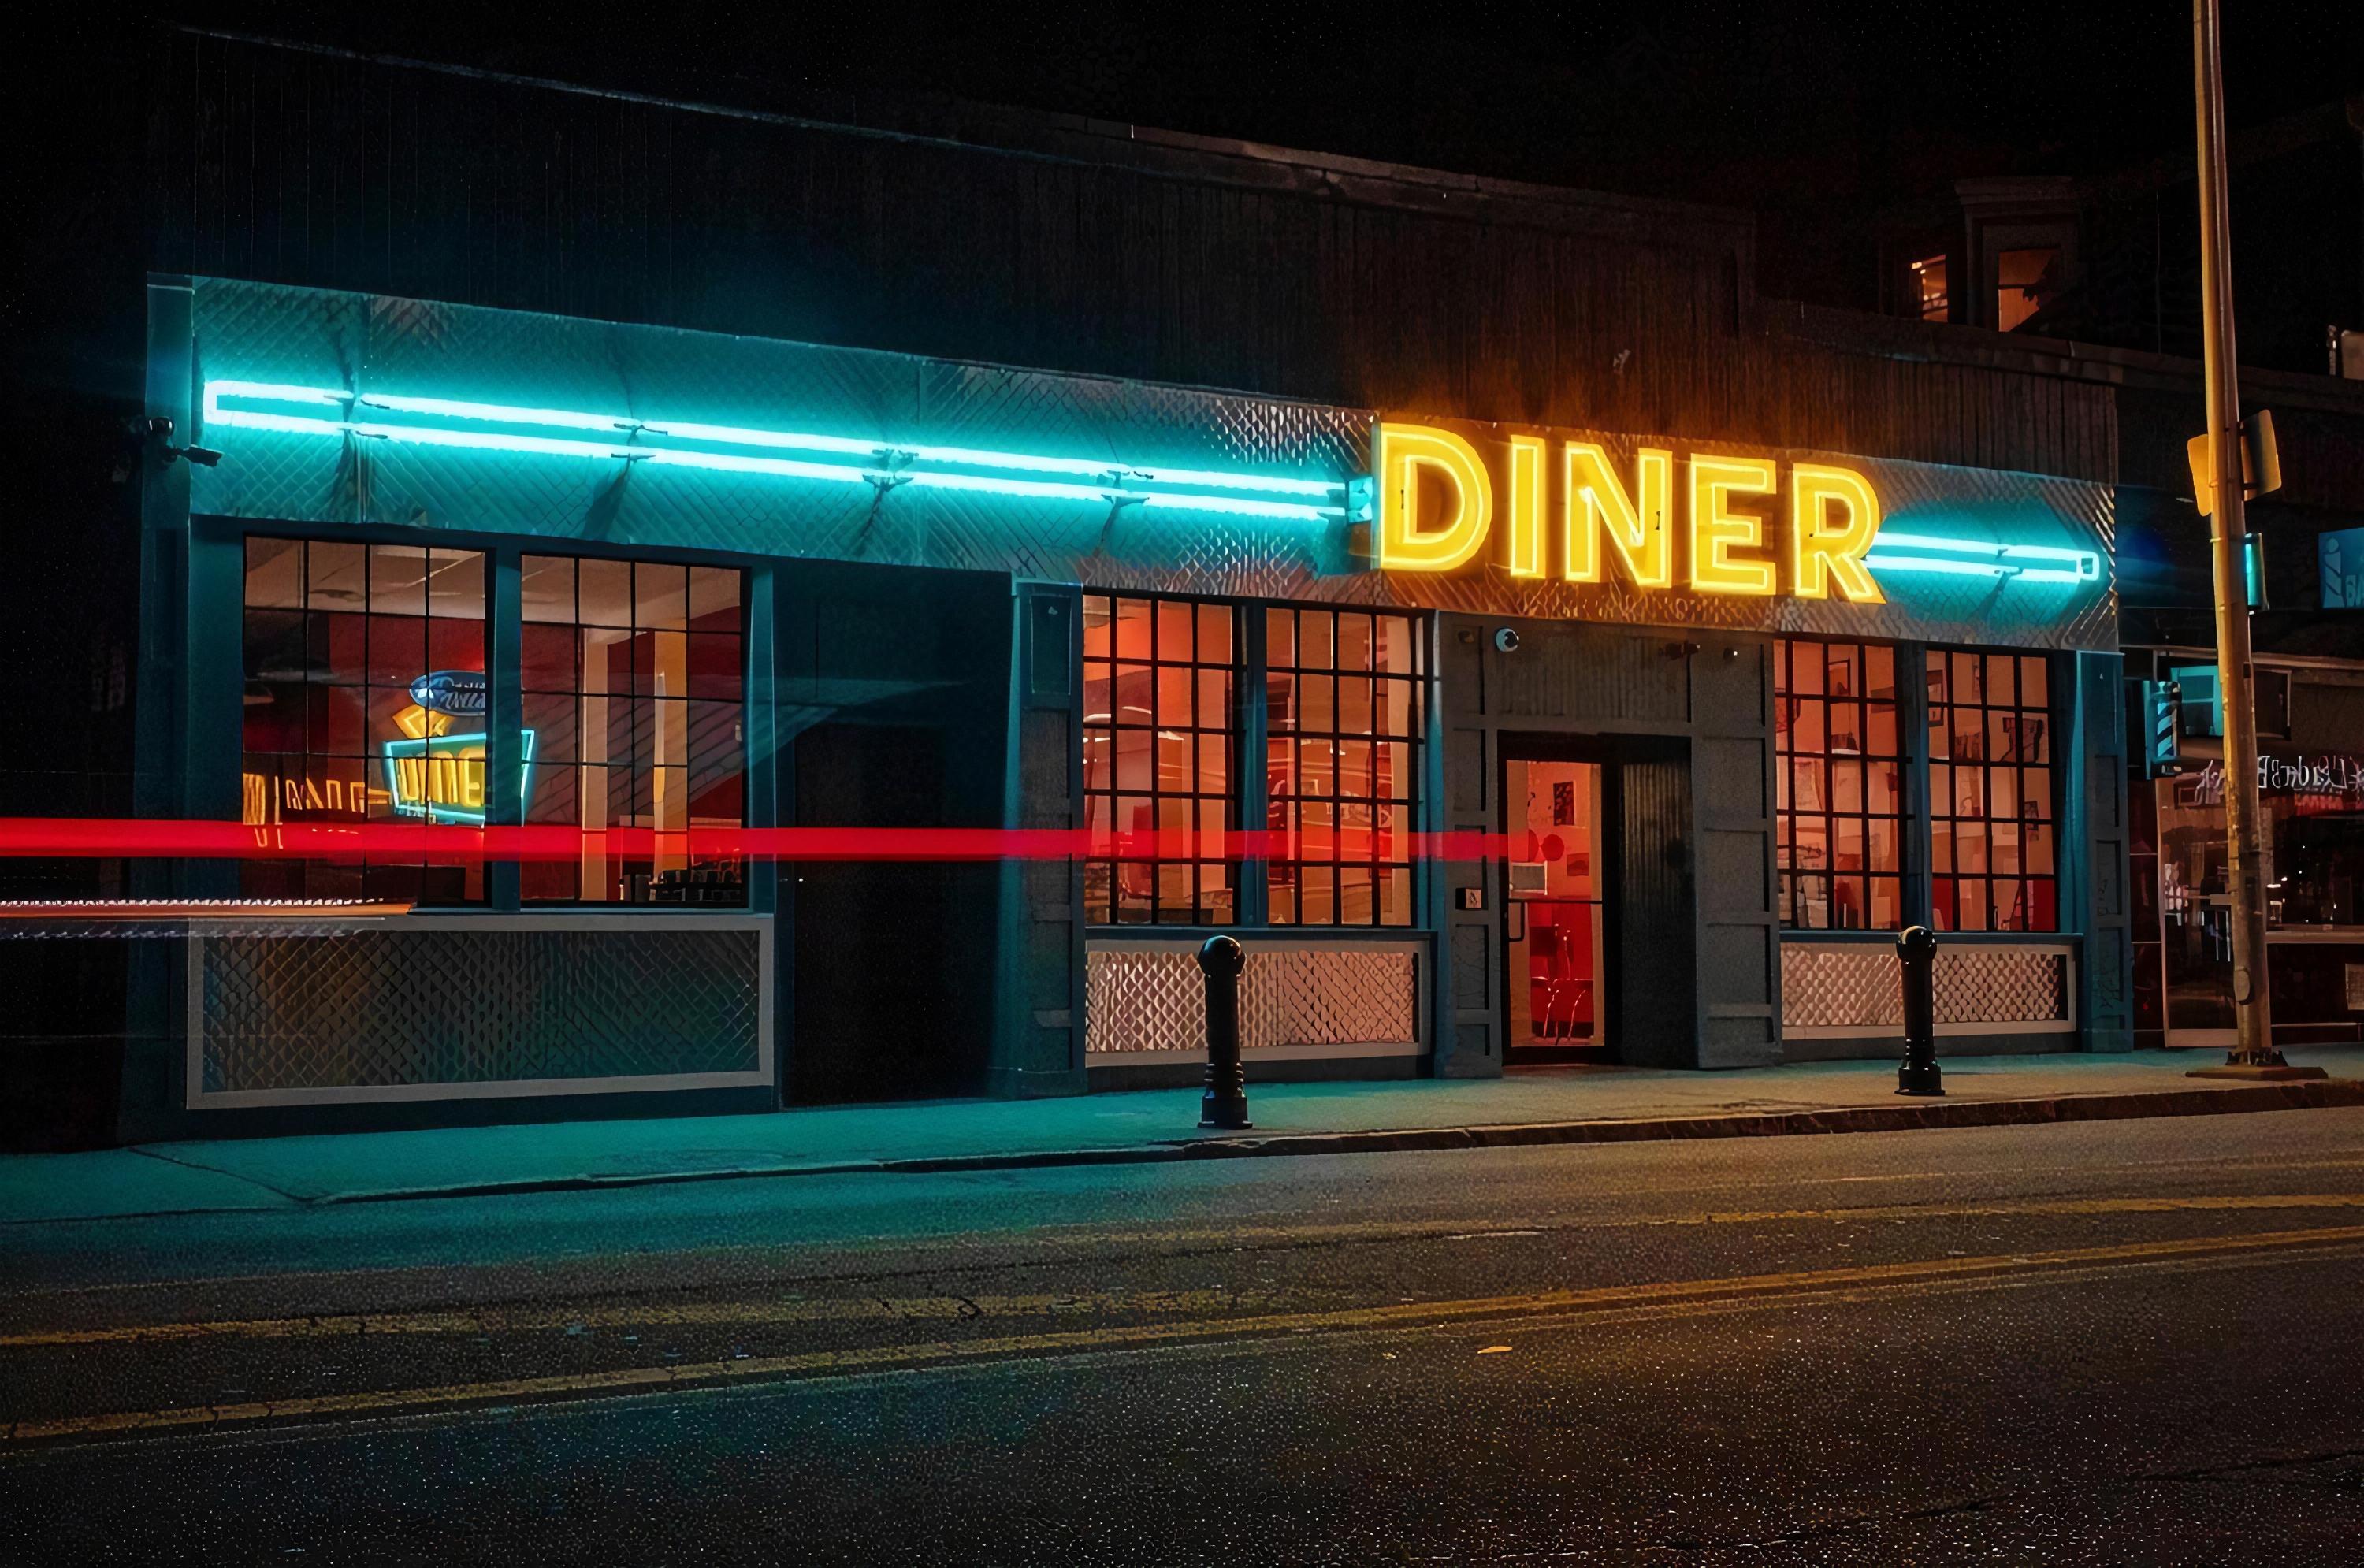 Neon Diner And Retro Car Late At Night Fog Rain And Colour Reflections On  Asphalt 3d Illustration Stock Photo  Download Image Now  iStock